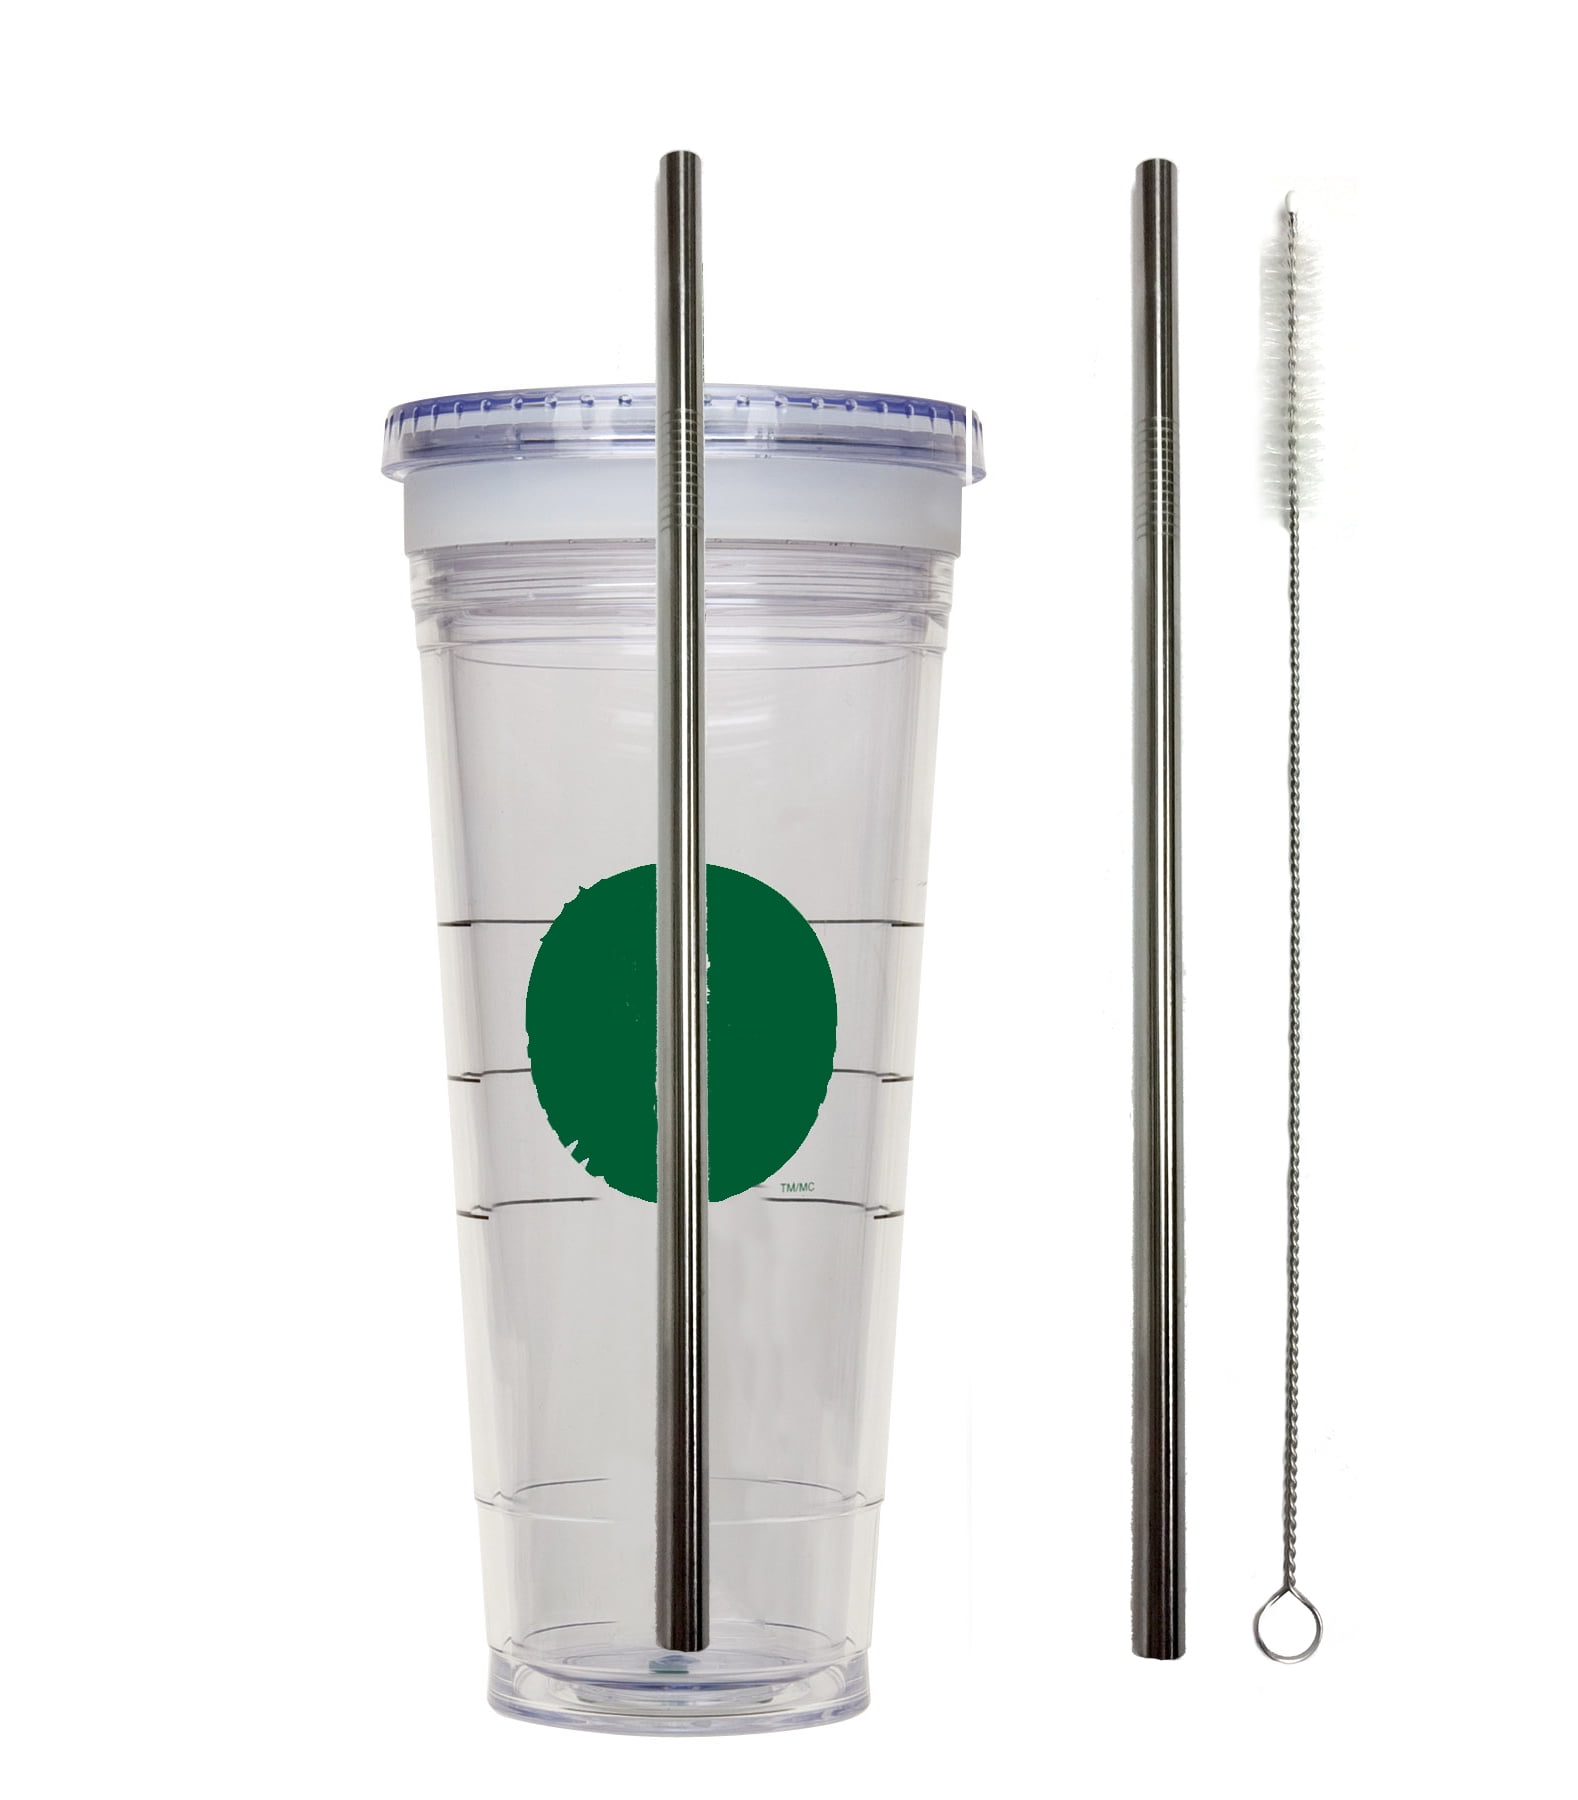 New Starbucks Reusable Cold Cup Replacement Lid And Green Straw